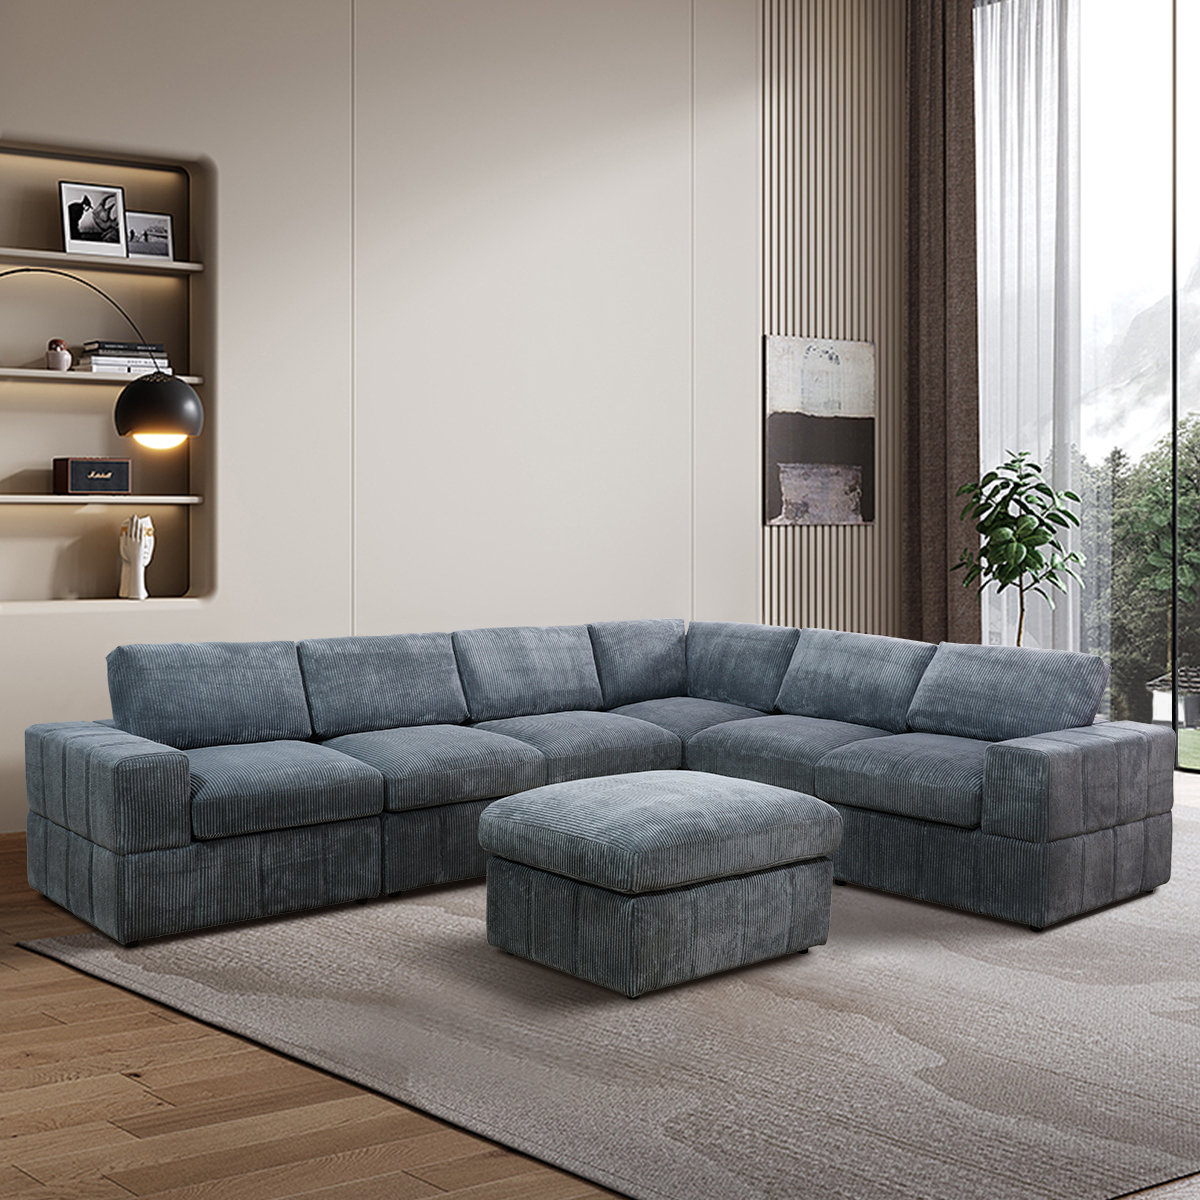 Mackennah 110.02 in. W Rolled Arms 4-Seat L Shaped Soft Corduroy Fabric  Modern Sectional Sofa with Reversible Ottoman